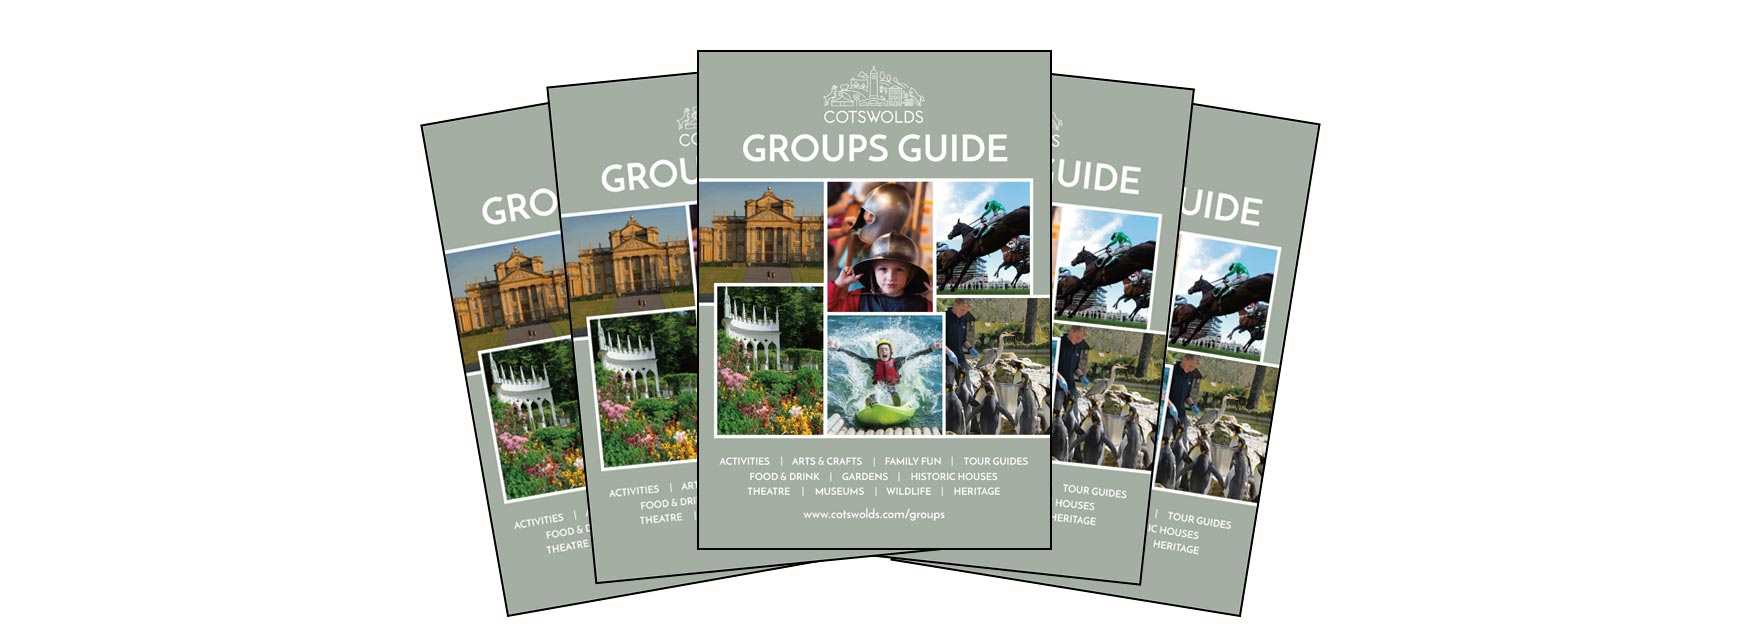 The Cotswolds Groups Guide